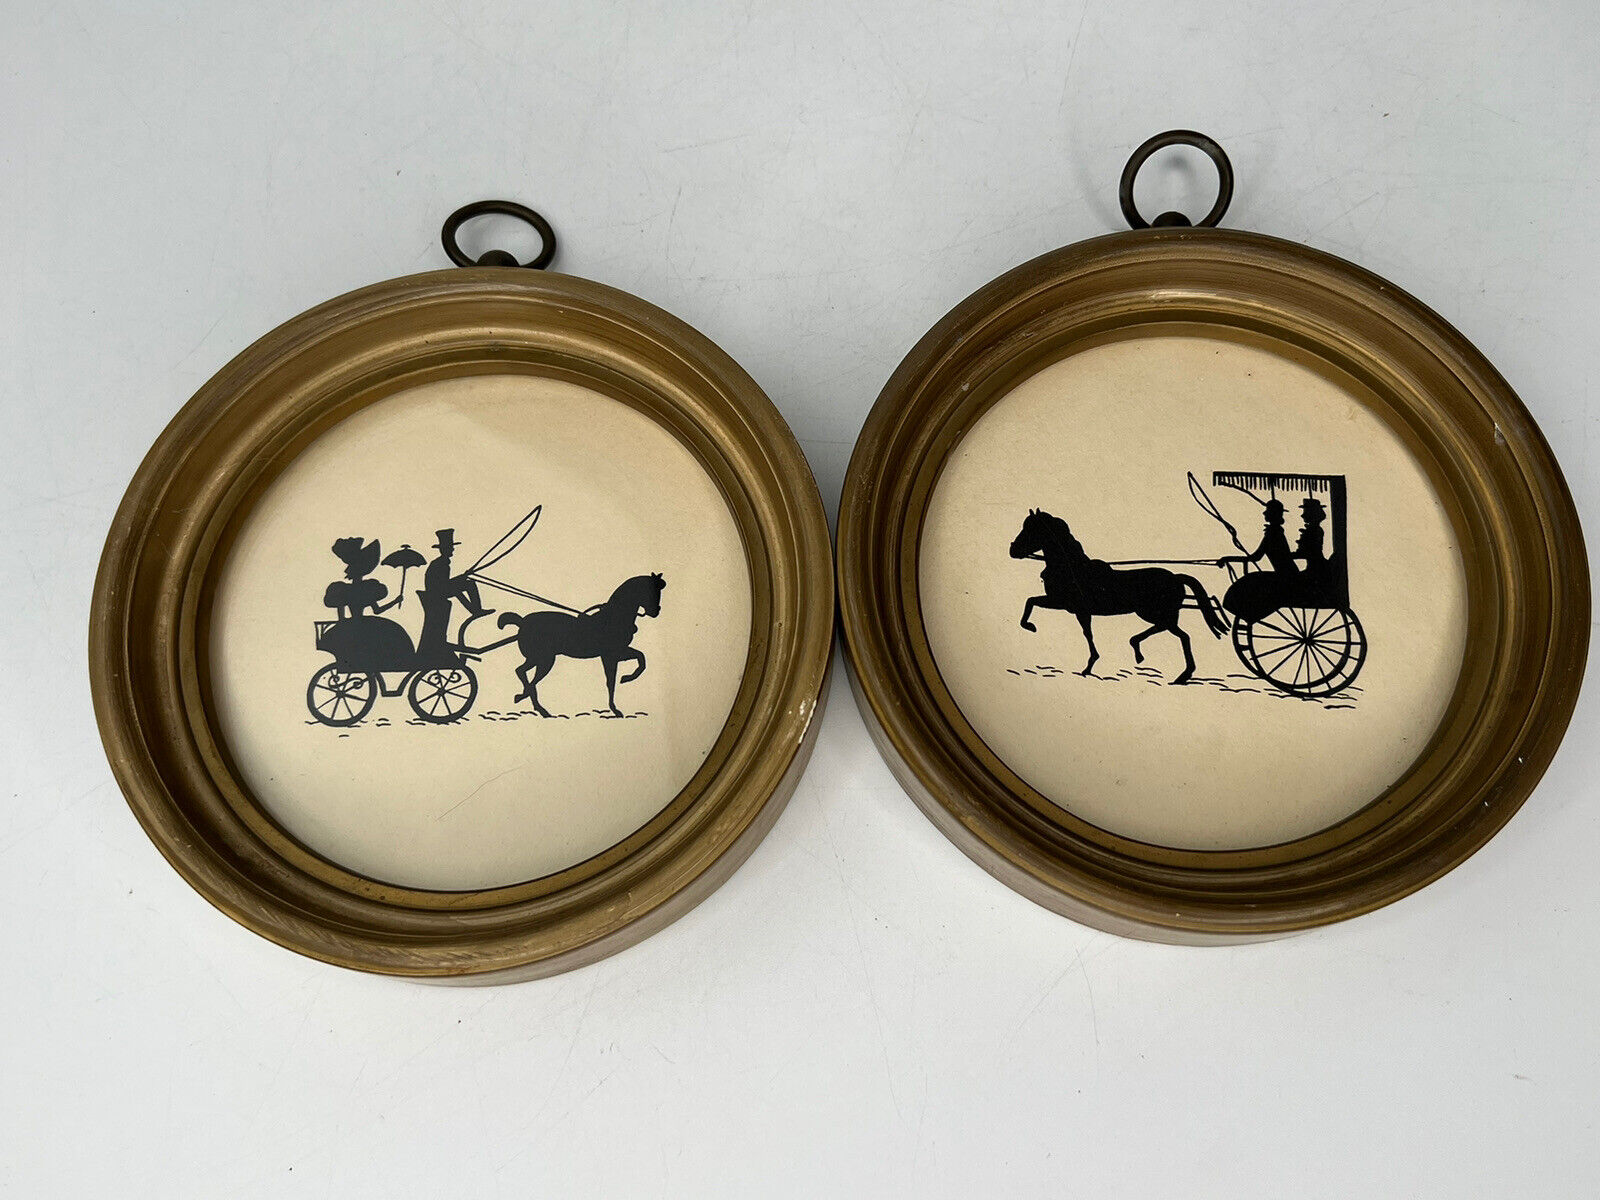 Vintage Silhouette Horse and buggy pictures in round gold frames 